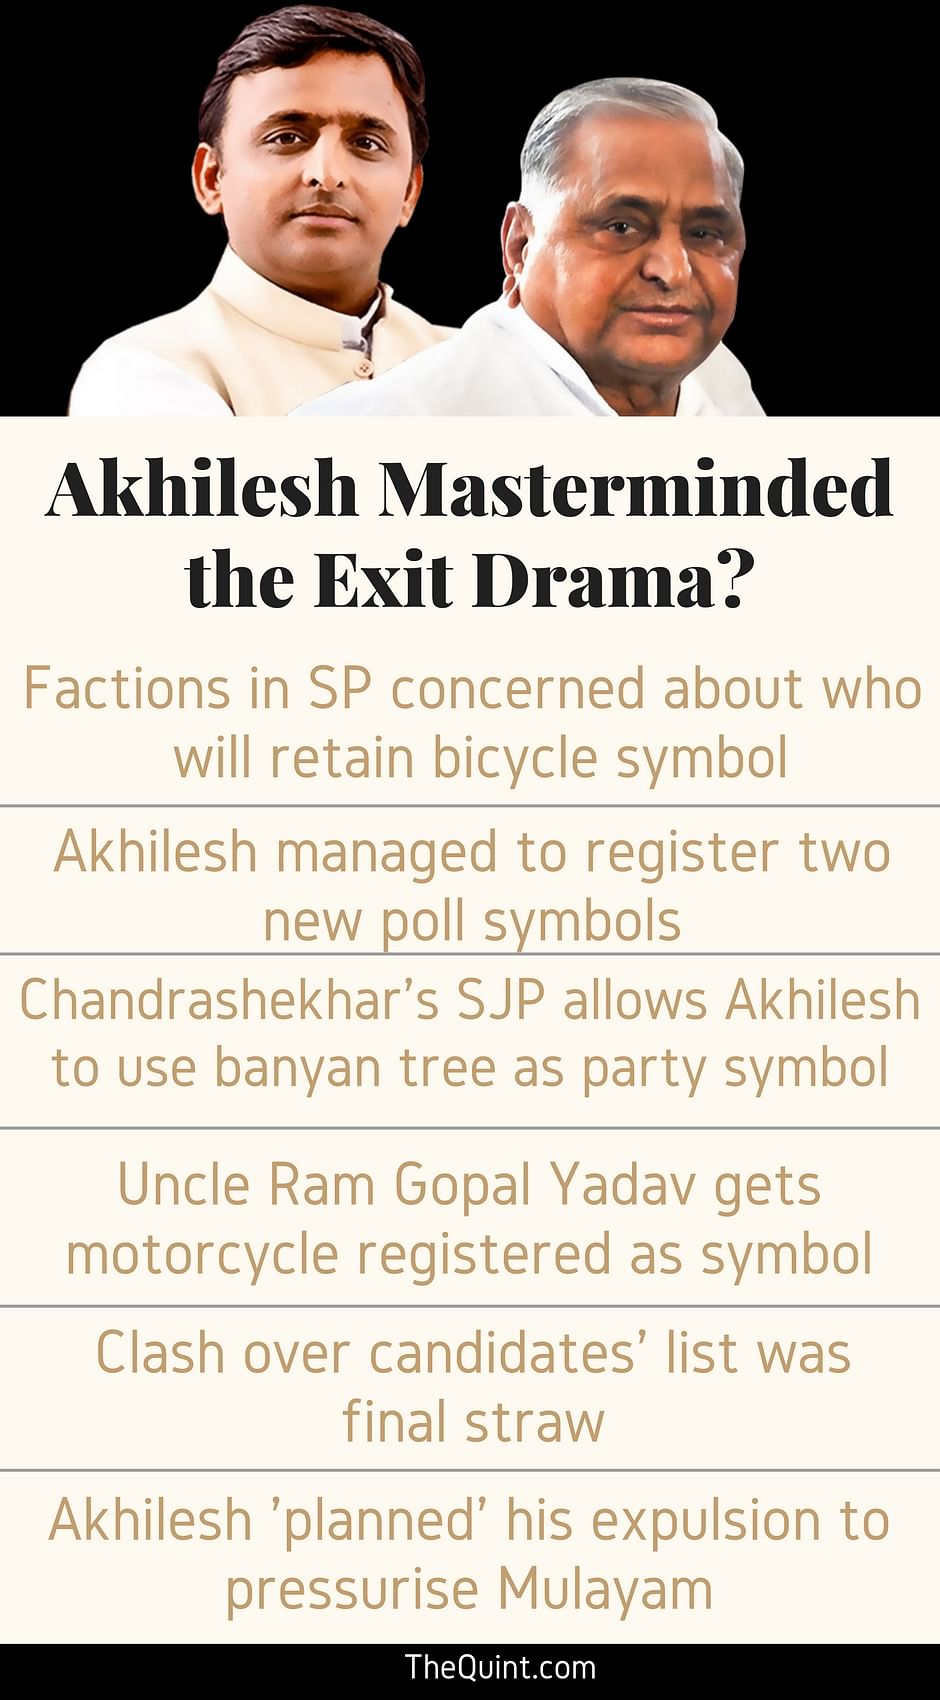 Akhilesh had prepared well for this battle and planned his own expulsion from the SP, writes Sharad Gupta.